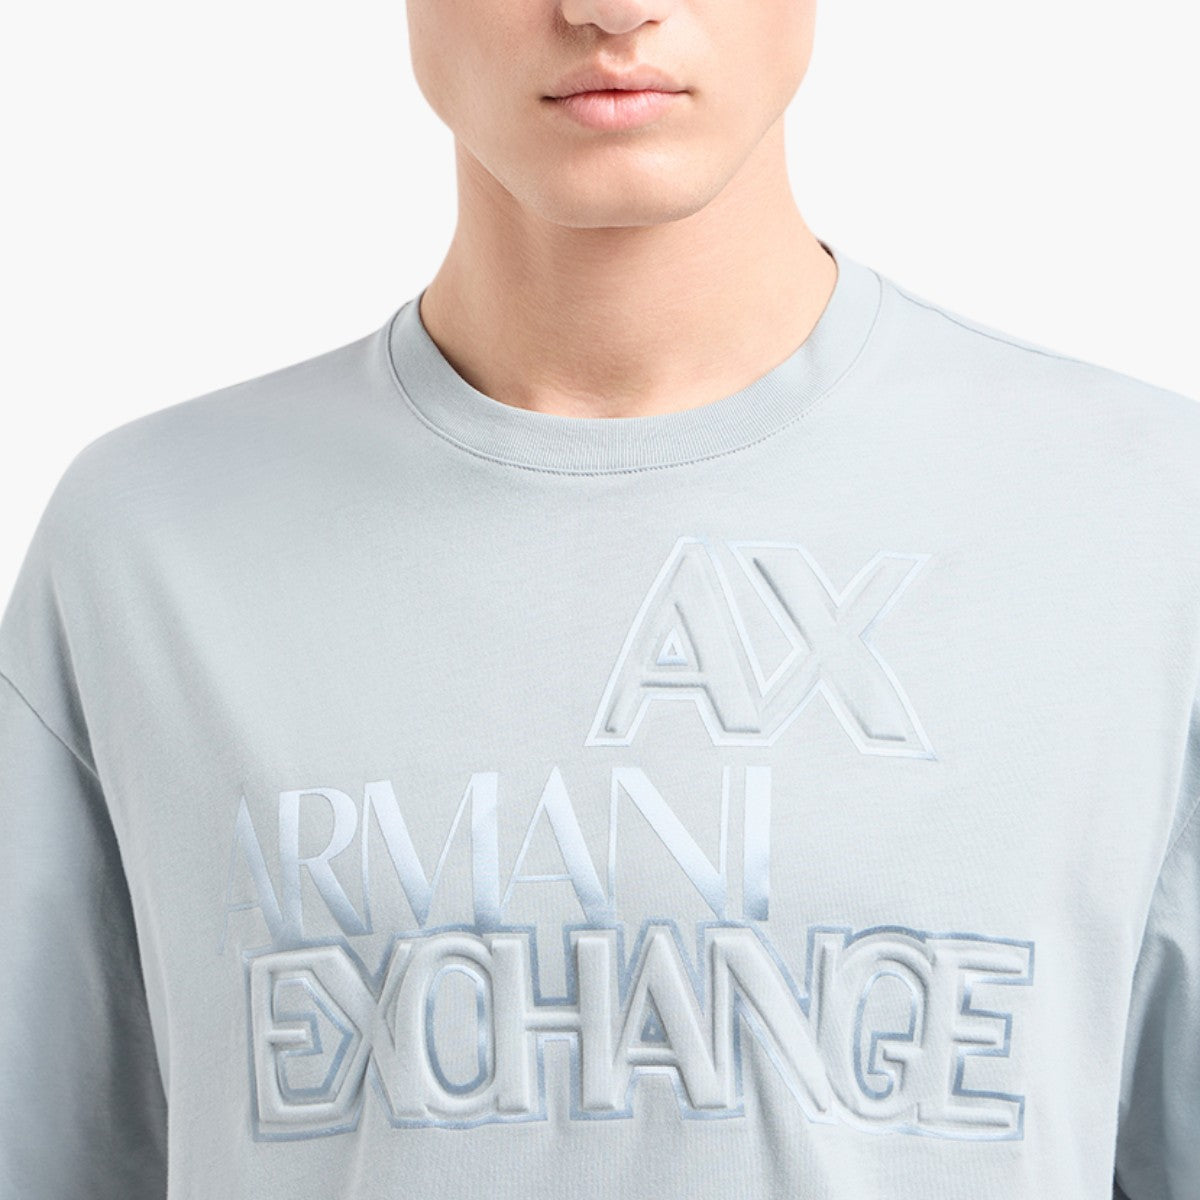 Armani Exchange Cotton T-Shirt With Printed Branding | LEVISONS